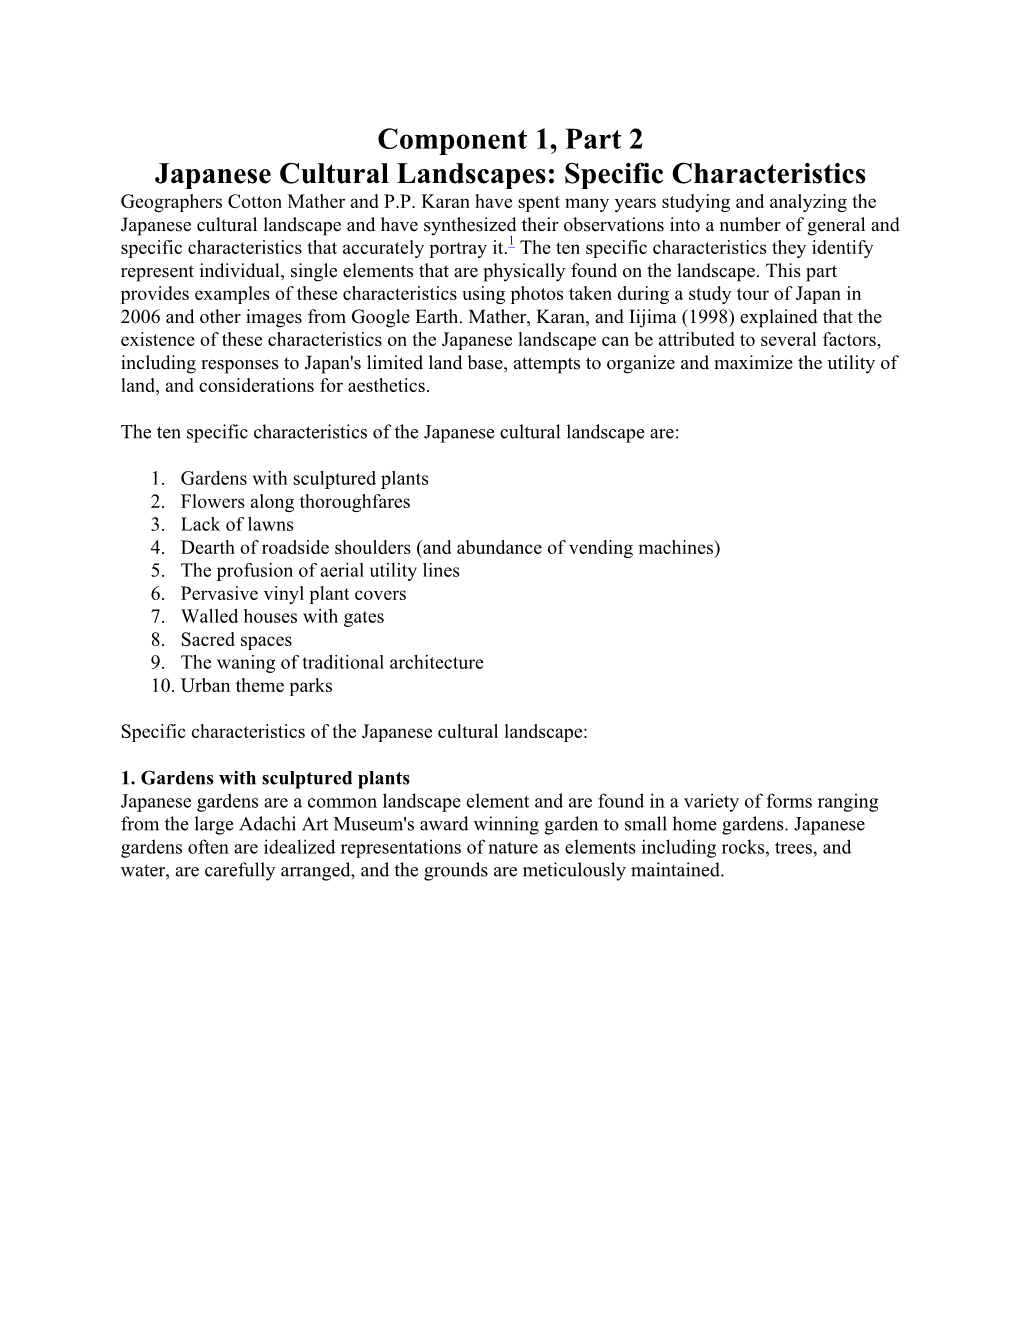 Component 1, Part 2 Japanese Cultural Landscapes: Specific Characteristics Geographers Cotton Mather and P.P